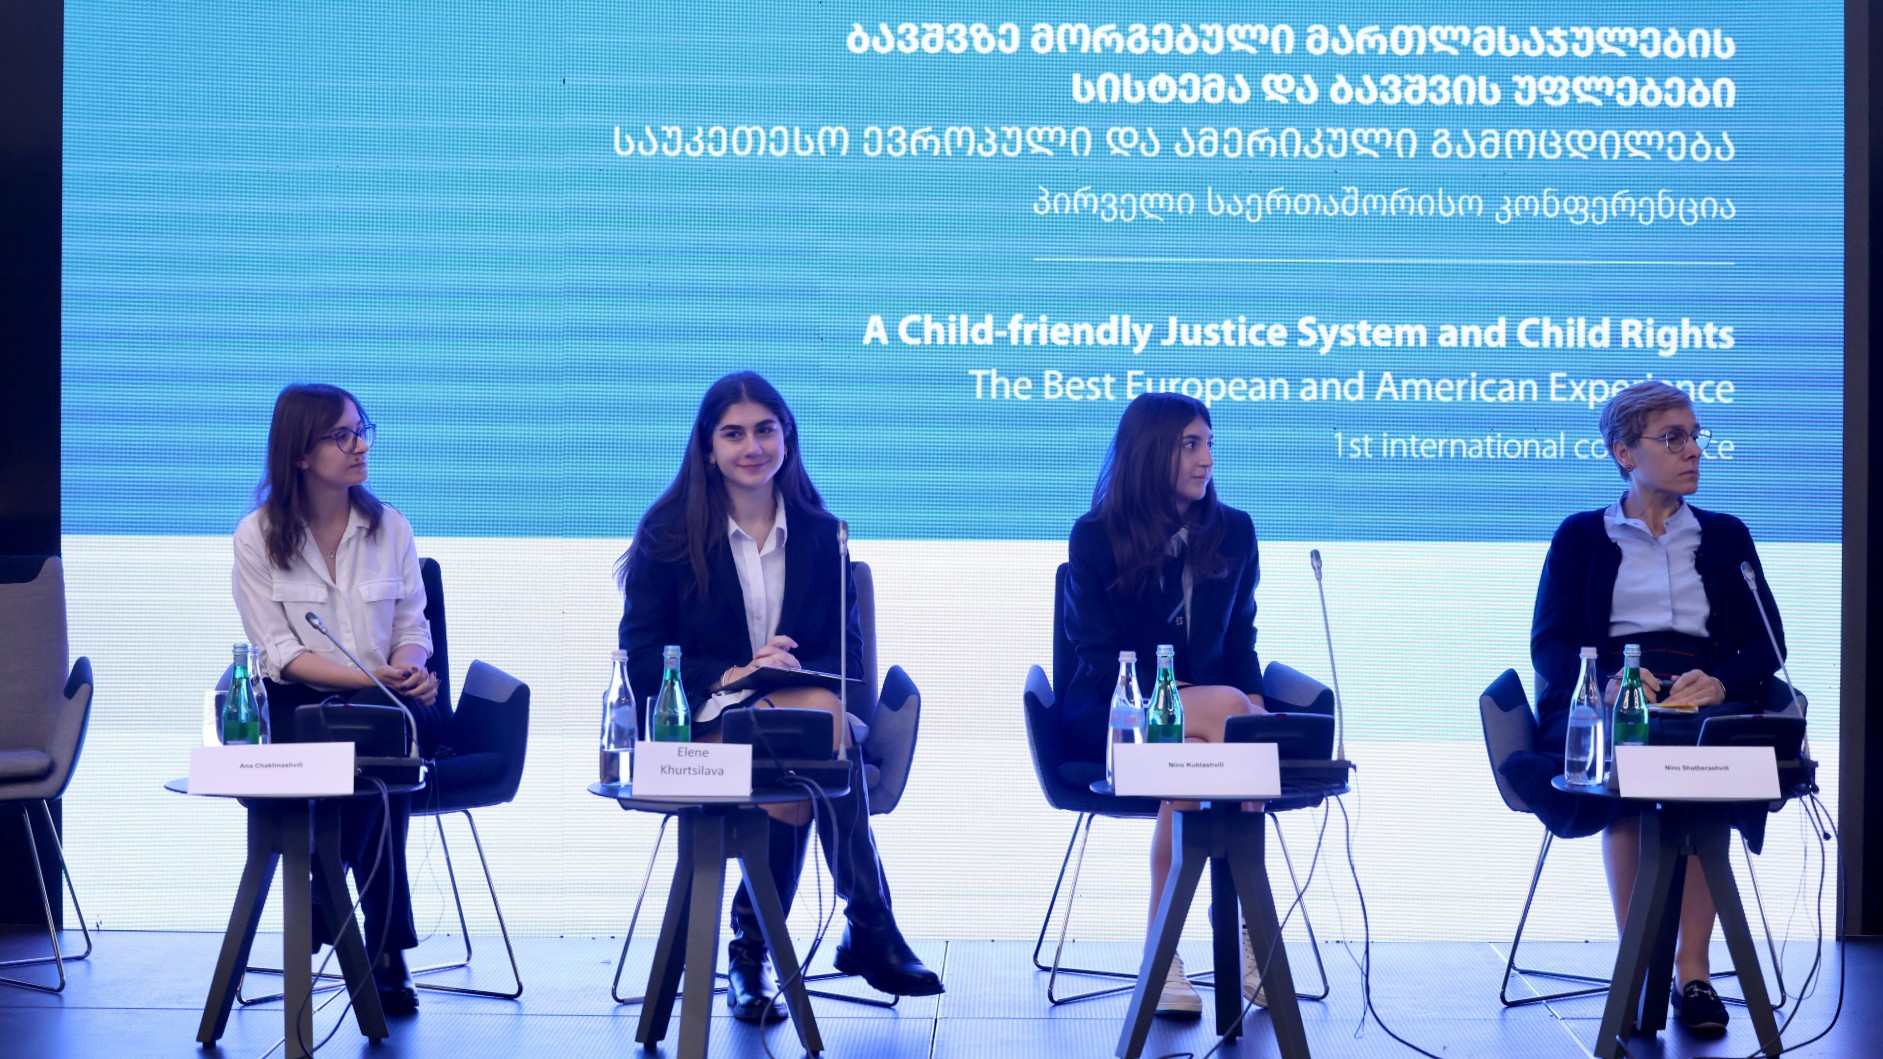 Discussing the Best European and American Practices in Child-friendly Justice System and Child Rights